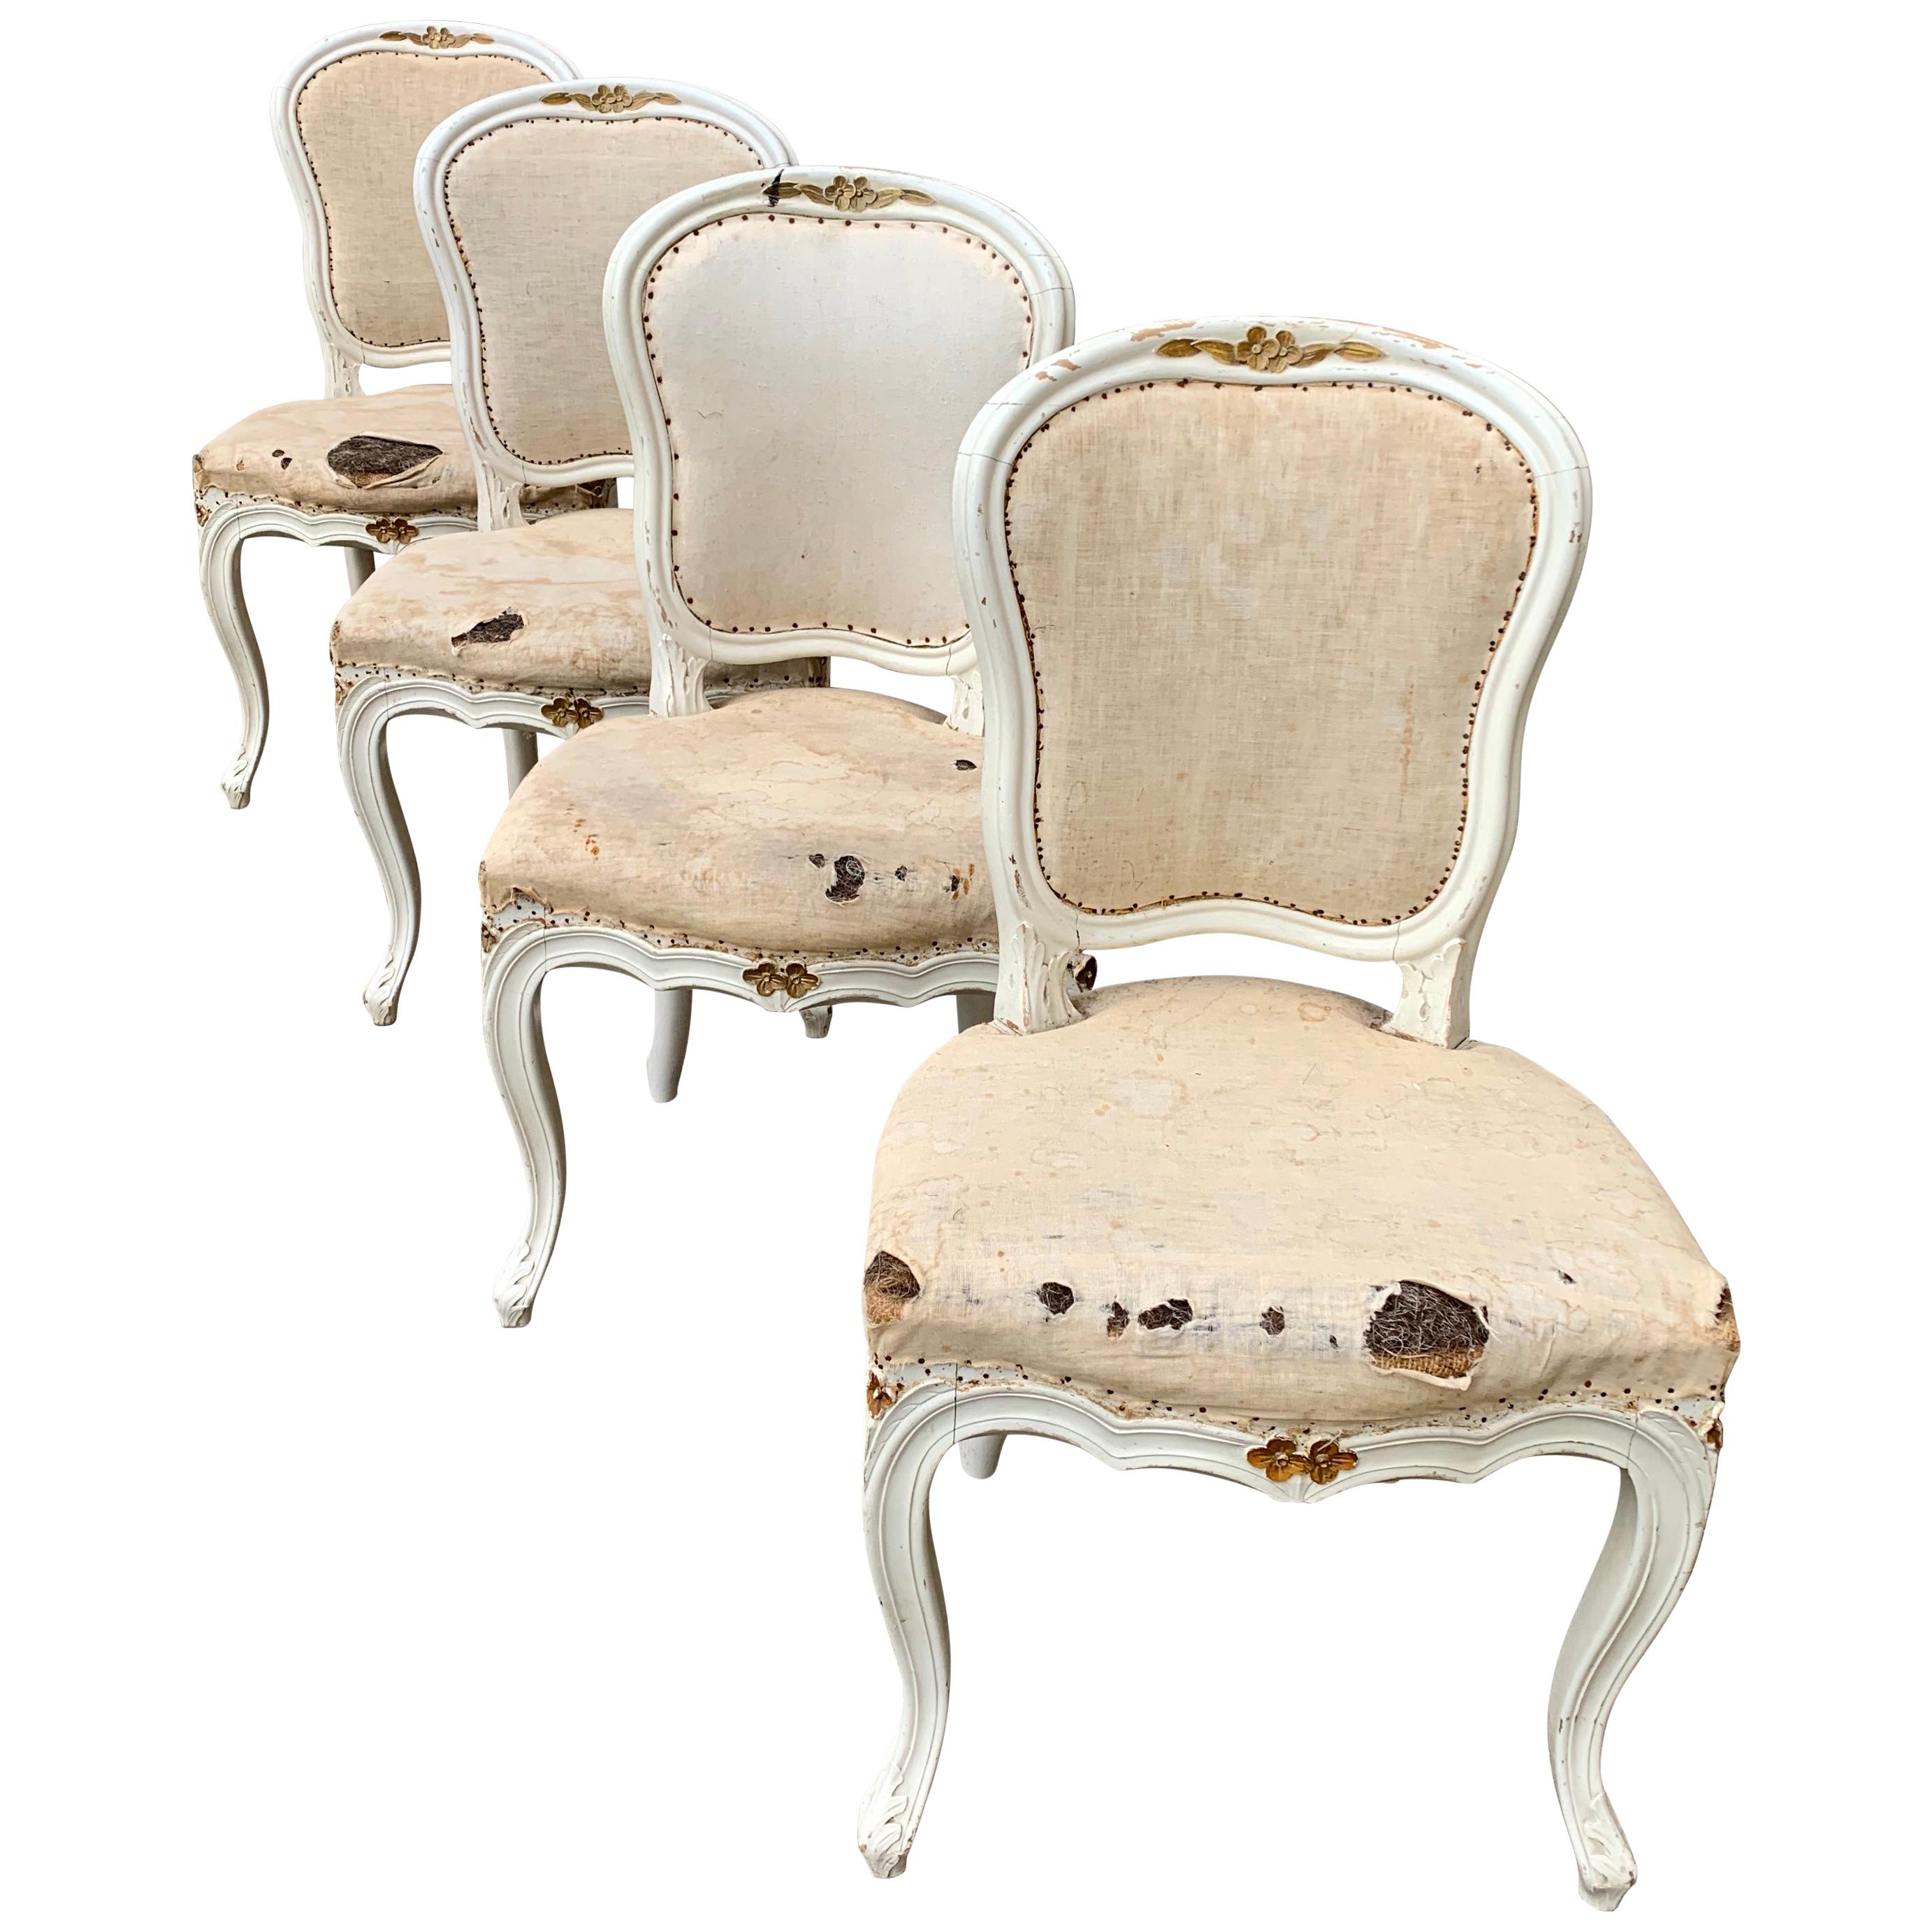 Set of 4 Swedish White Painted 19th Century Rococo Style Chairs